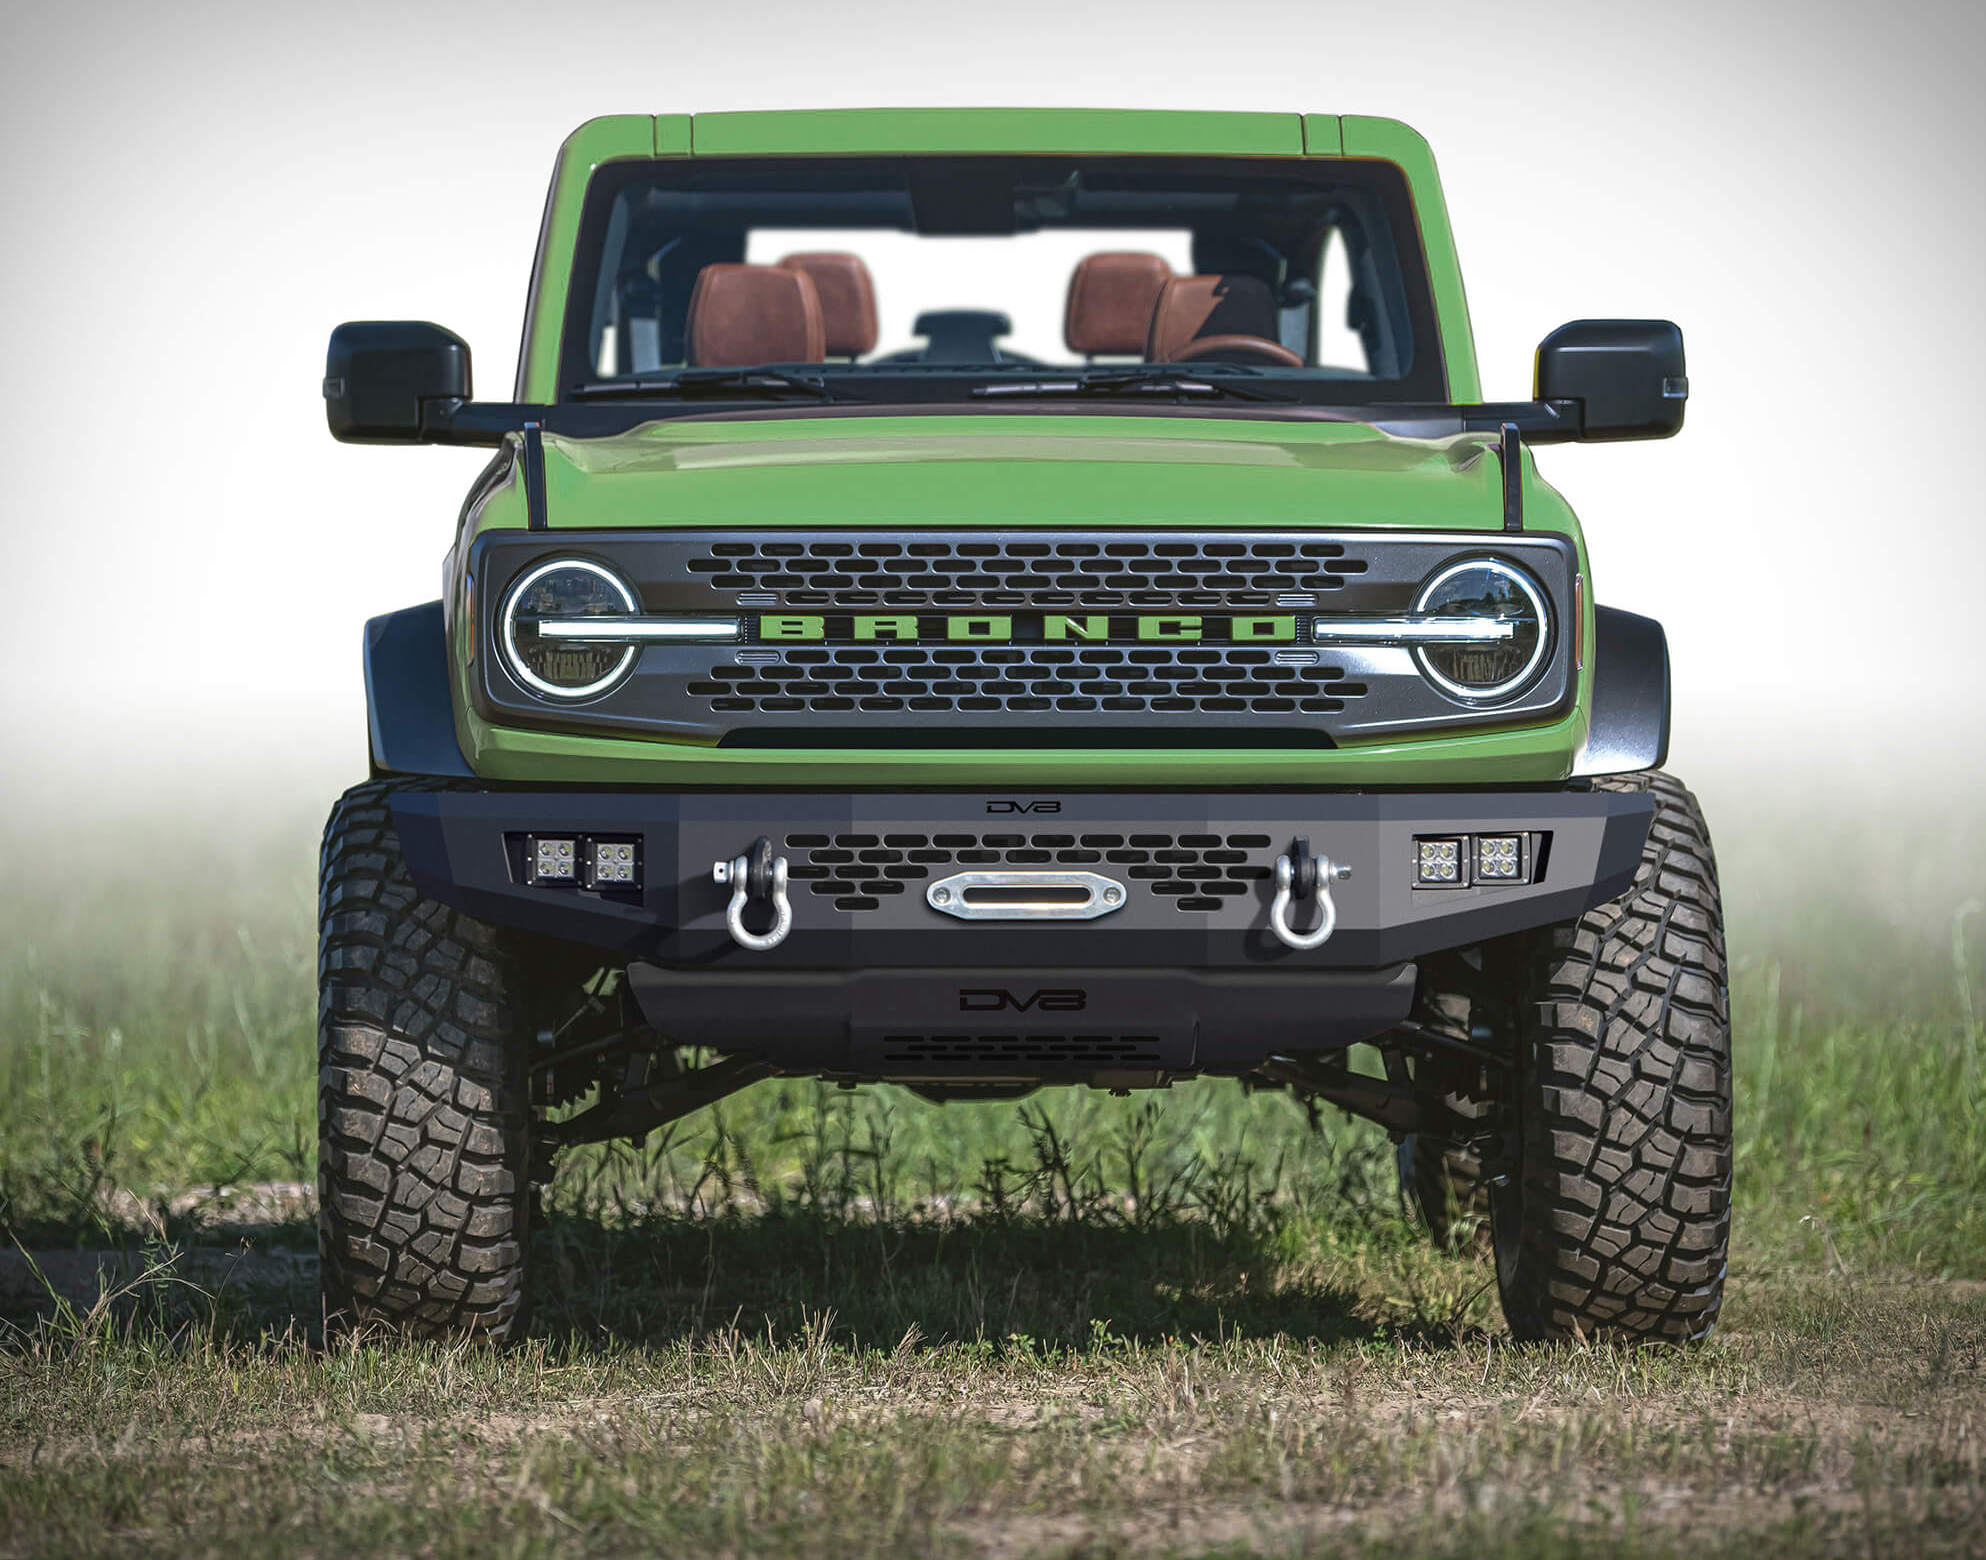 DV8 Front Bumper w/ Recessed Winch Previewed on Green 2021 Bronco